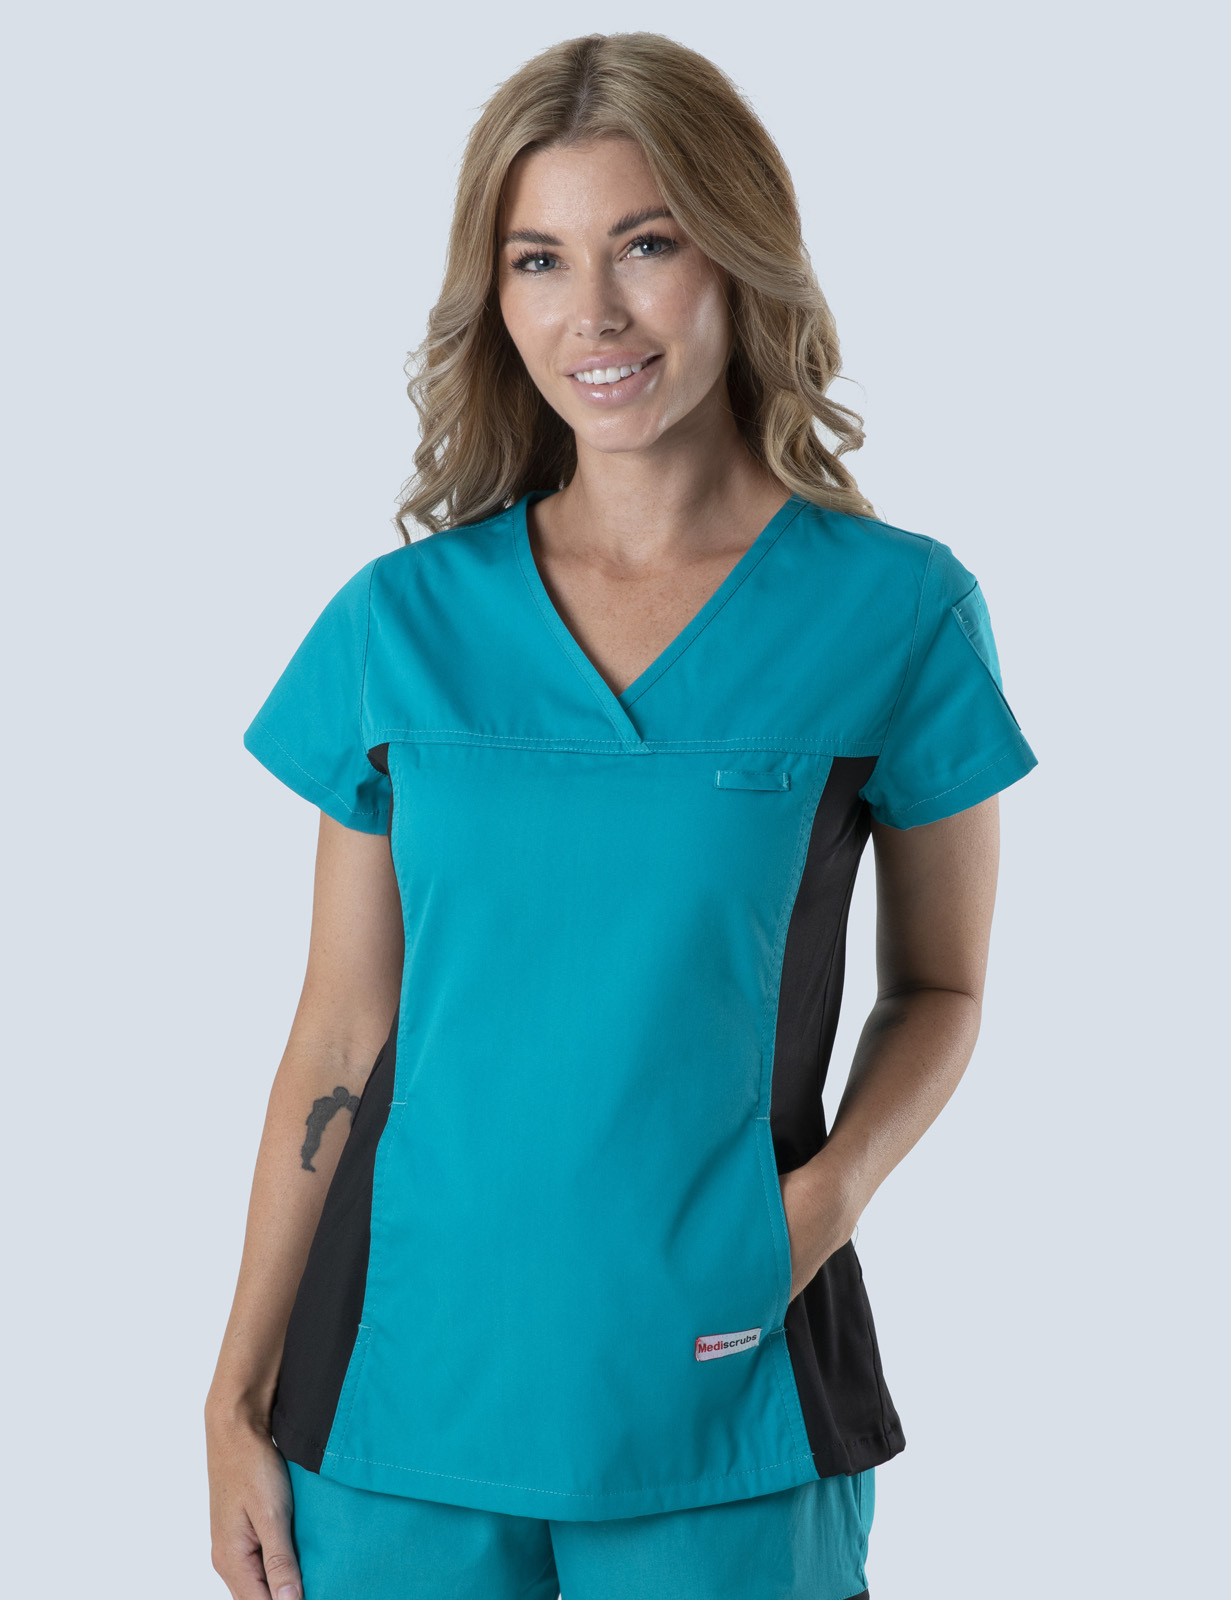 Ashmore Retreat Endorsed Enrolled Nurse Top Only Bundle (Women's Fit Spandex in Teal incl Logo) 